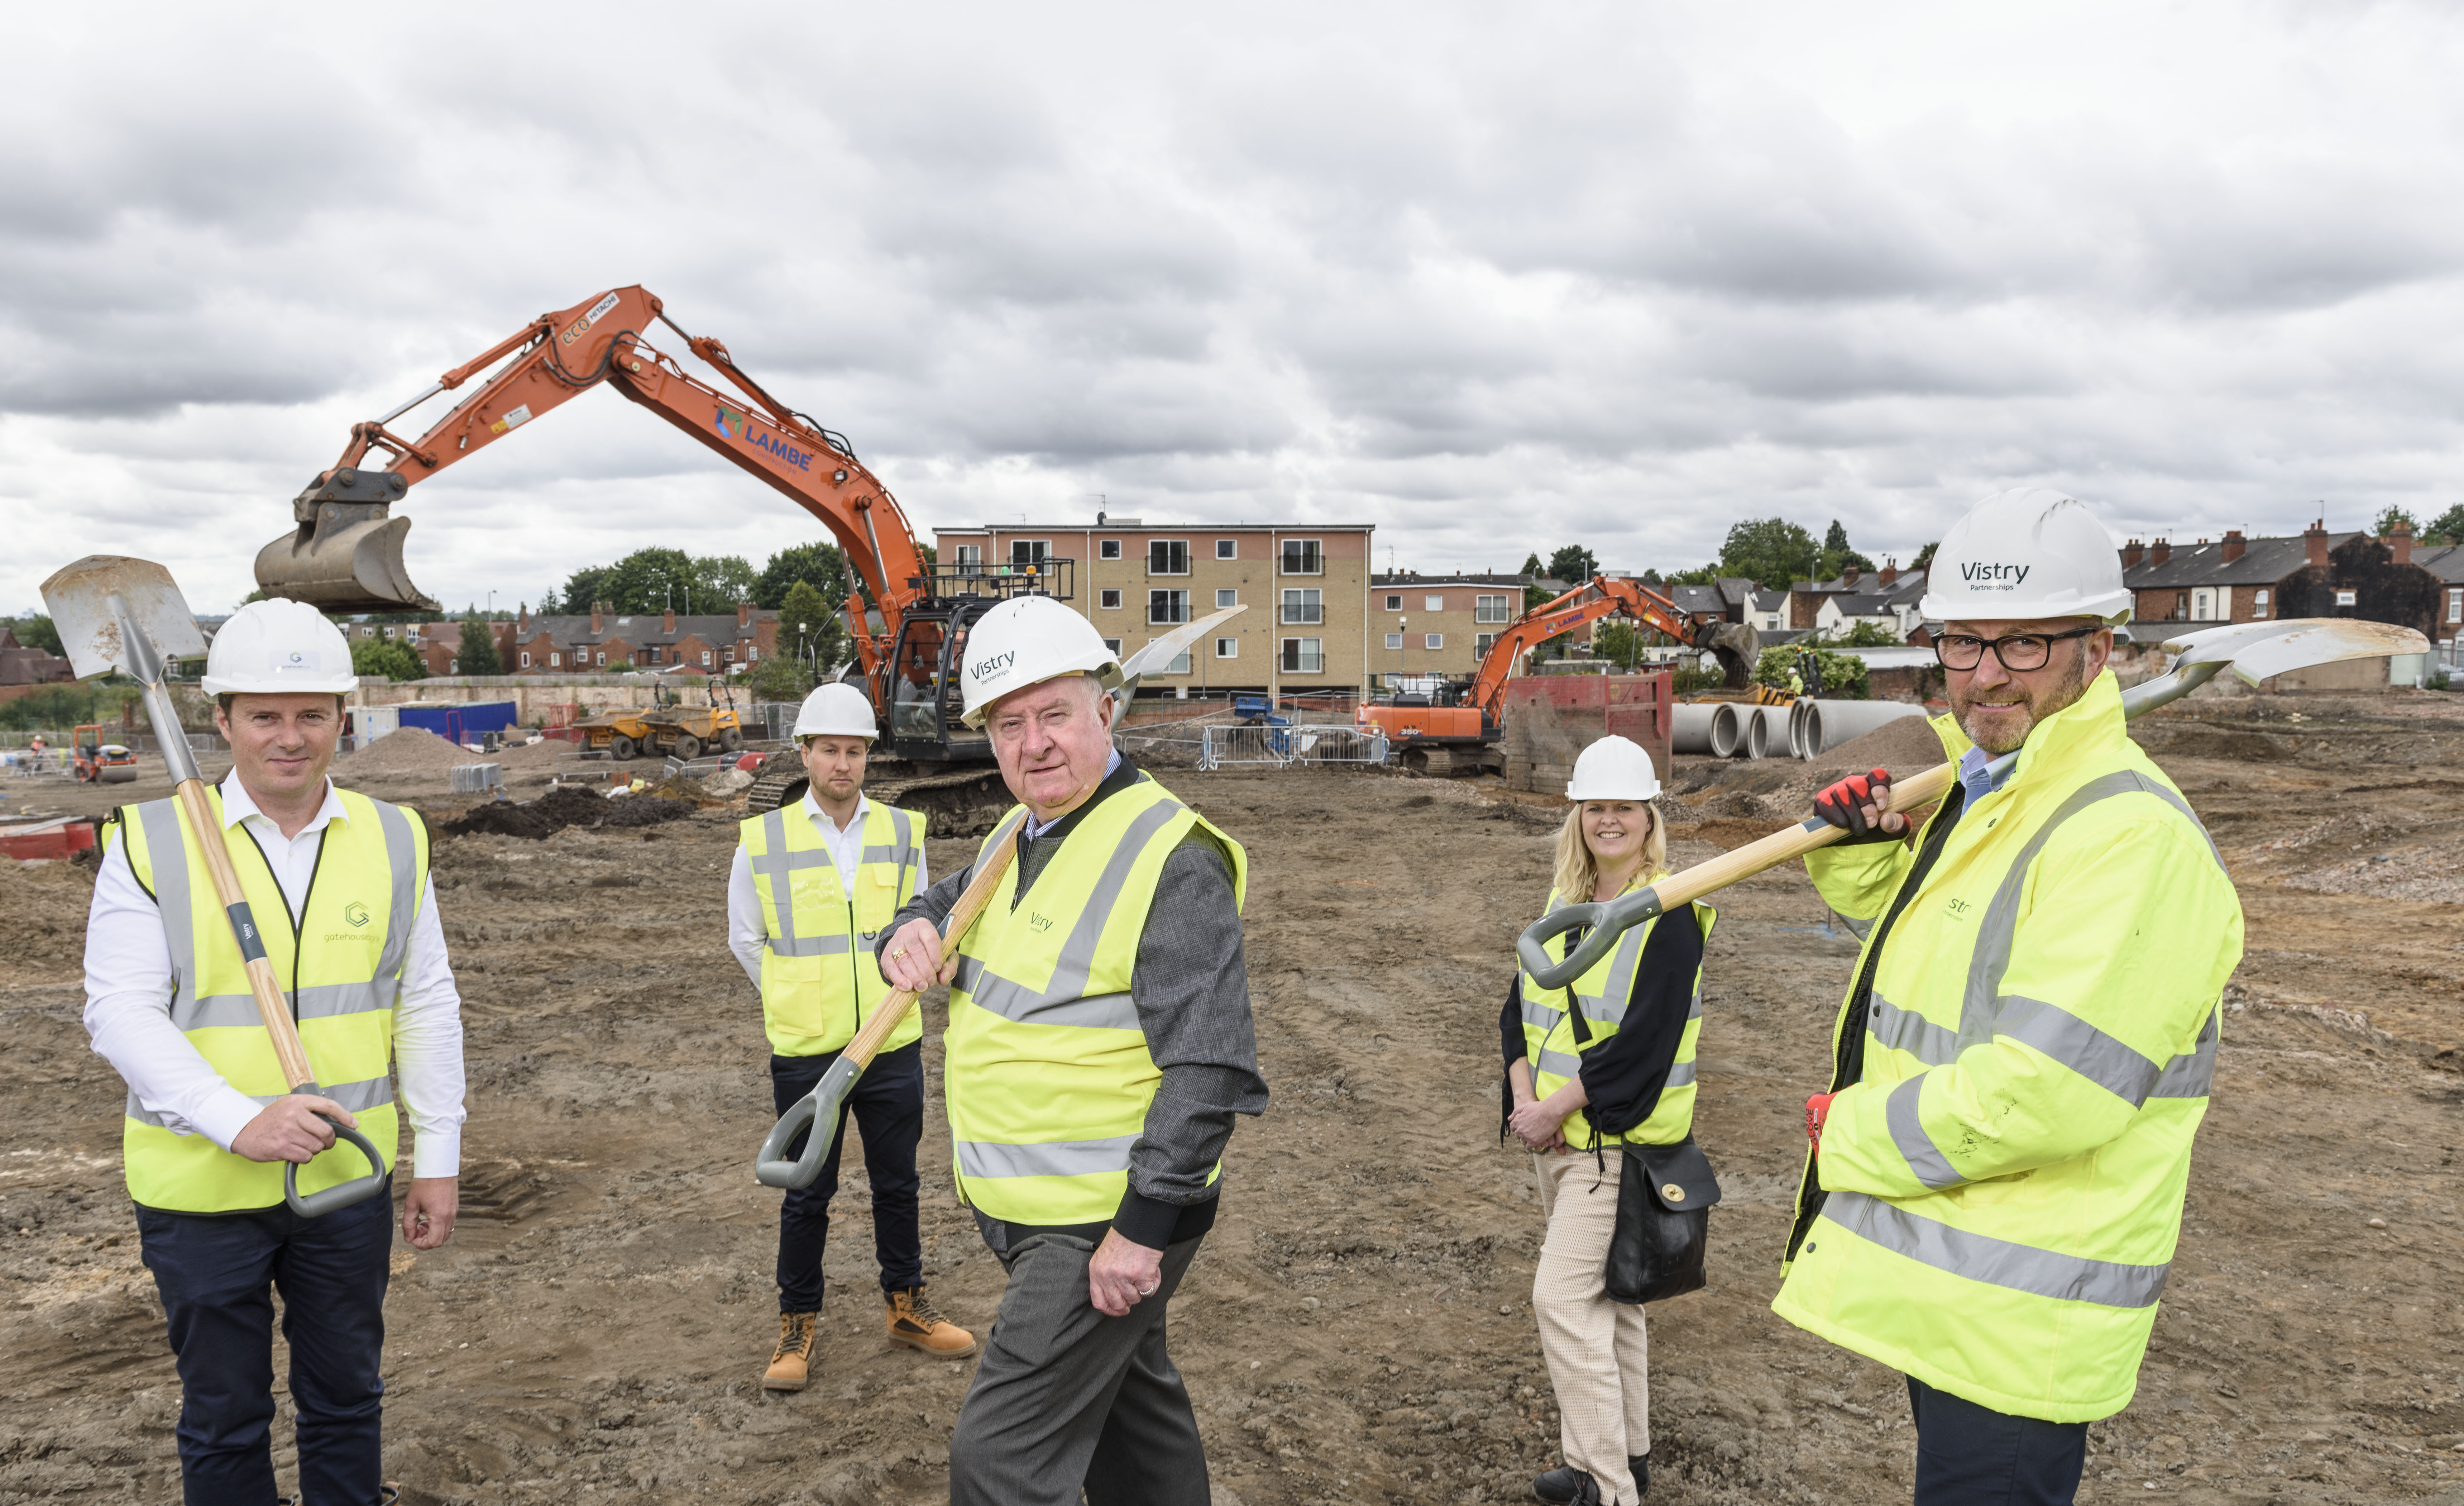 l-r Paul Stockwell, Gatehouse Bank, Ged McPartlin, Ascend, WMCA portfolio holder for housing and land Cllr Mike Bird, Rebecca Bennett, WHG and Darren Beale, Vistry Partnerships at the former Harvestime Bakery site in Walsall.